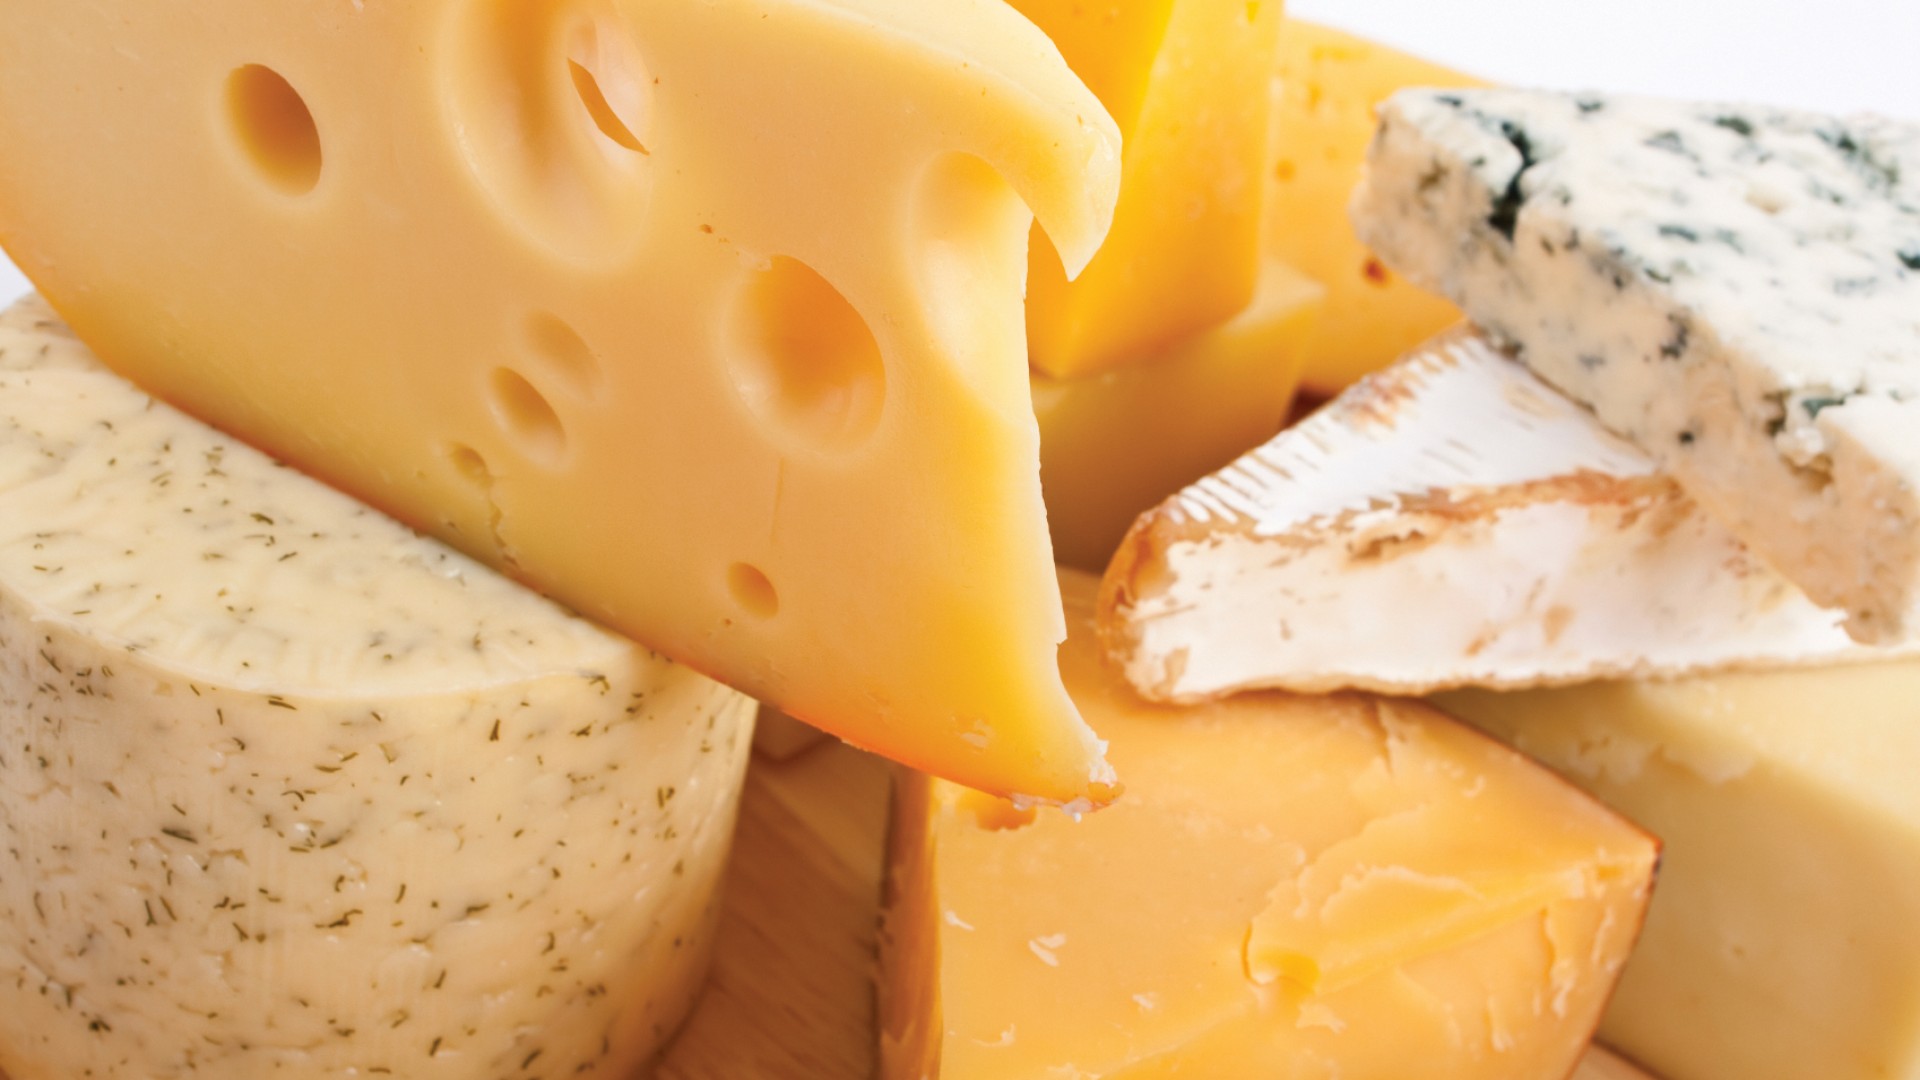 Pieces Of Cheese Of Different Kinds - Types Of Cheese - HD Wallpaper 